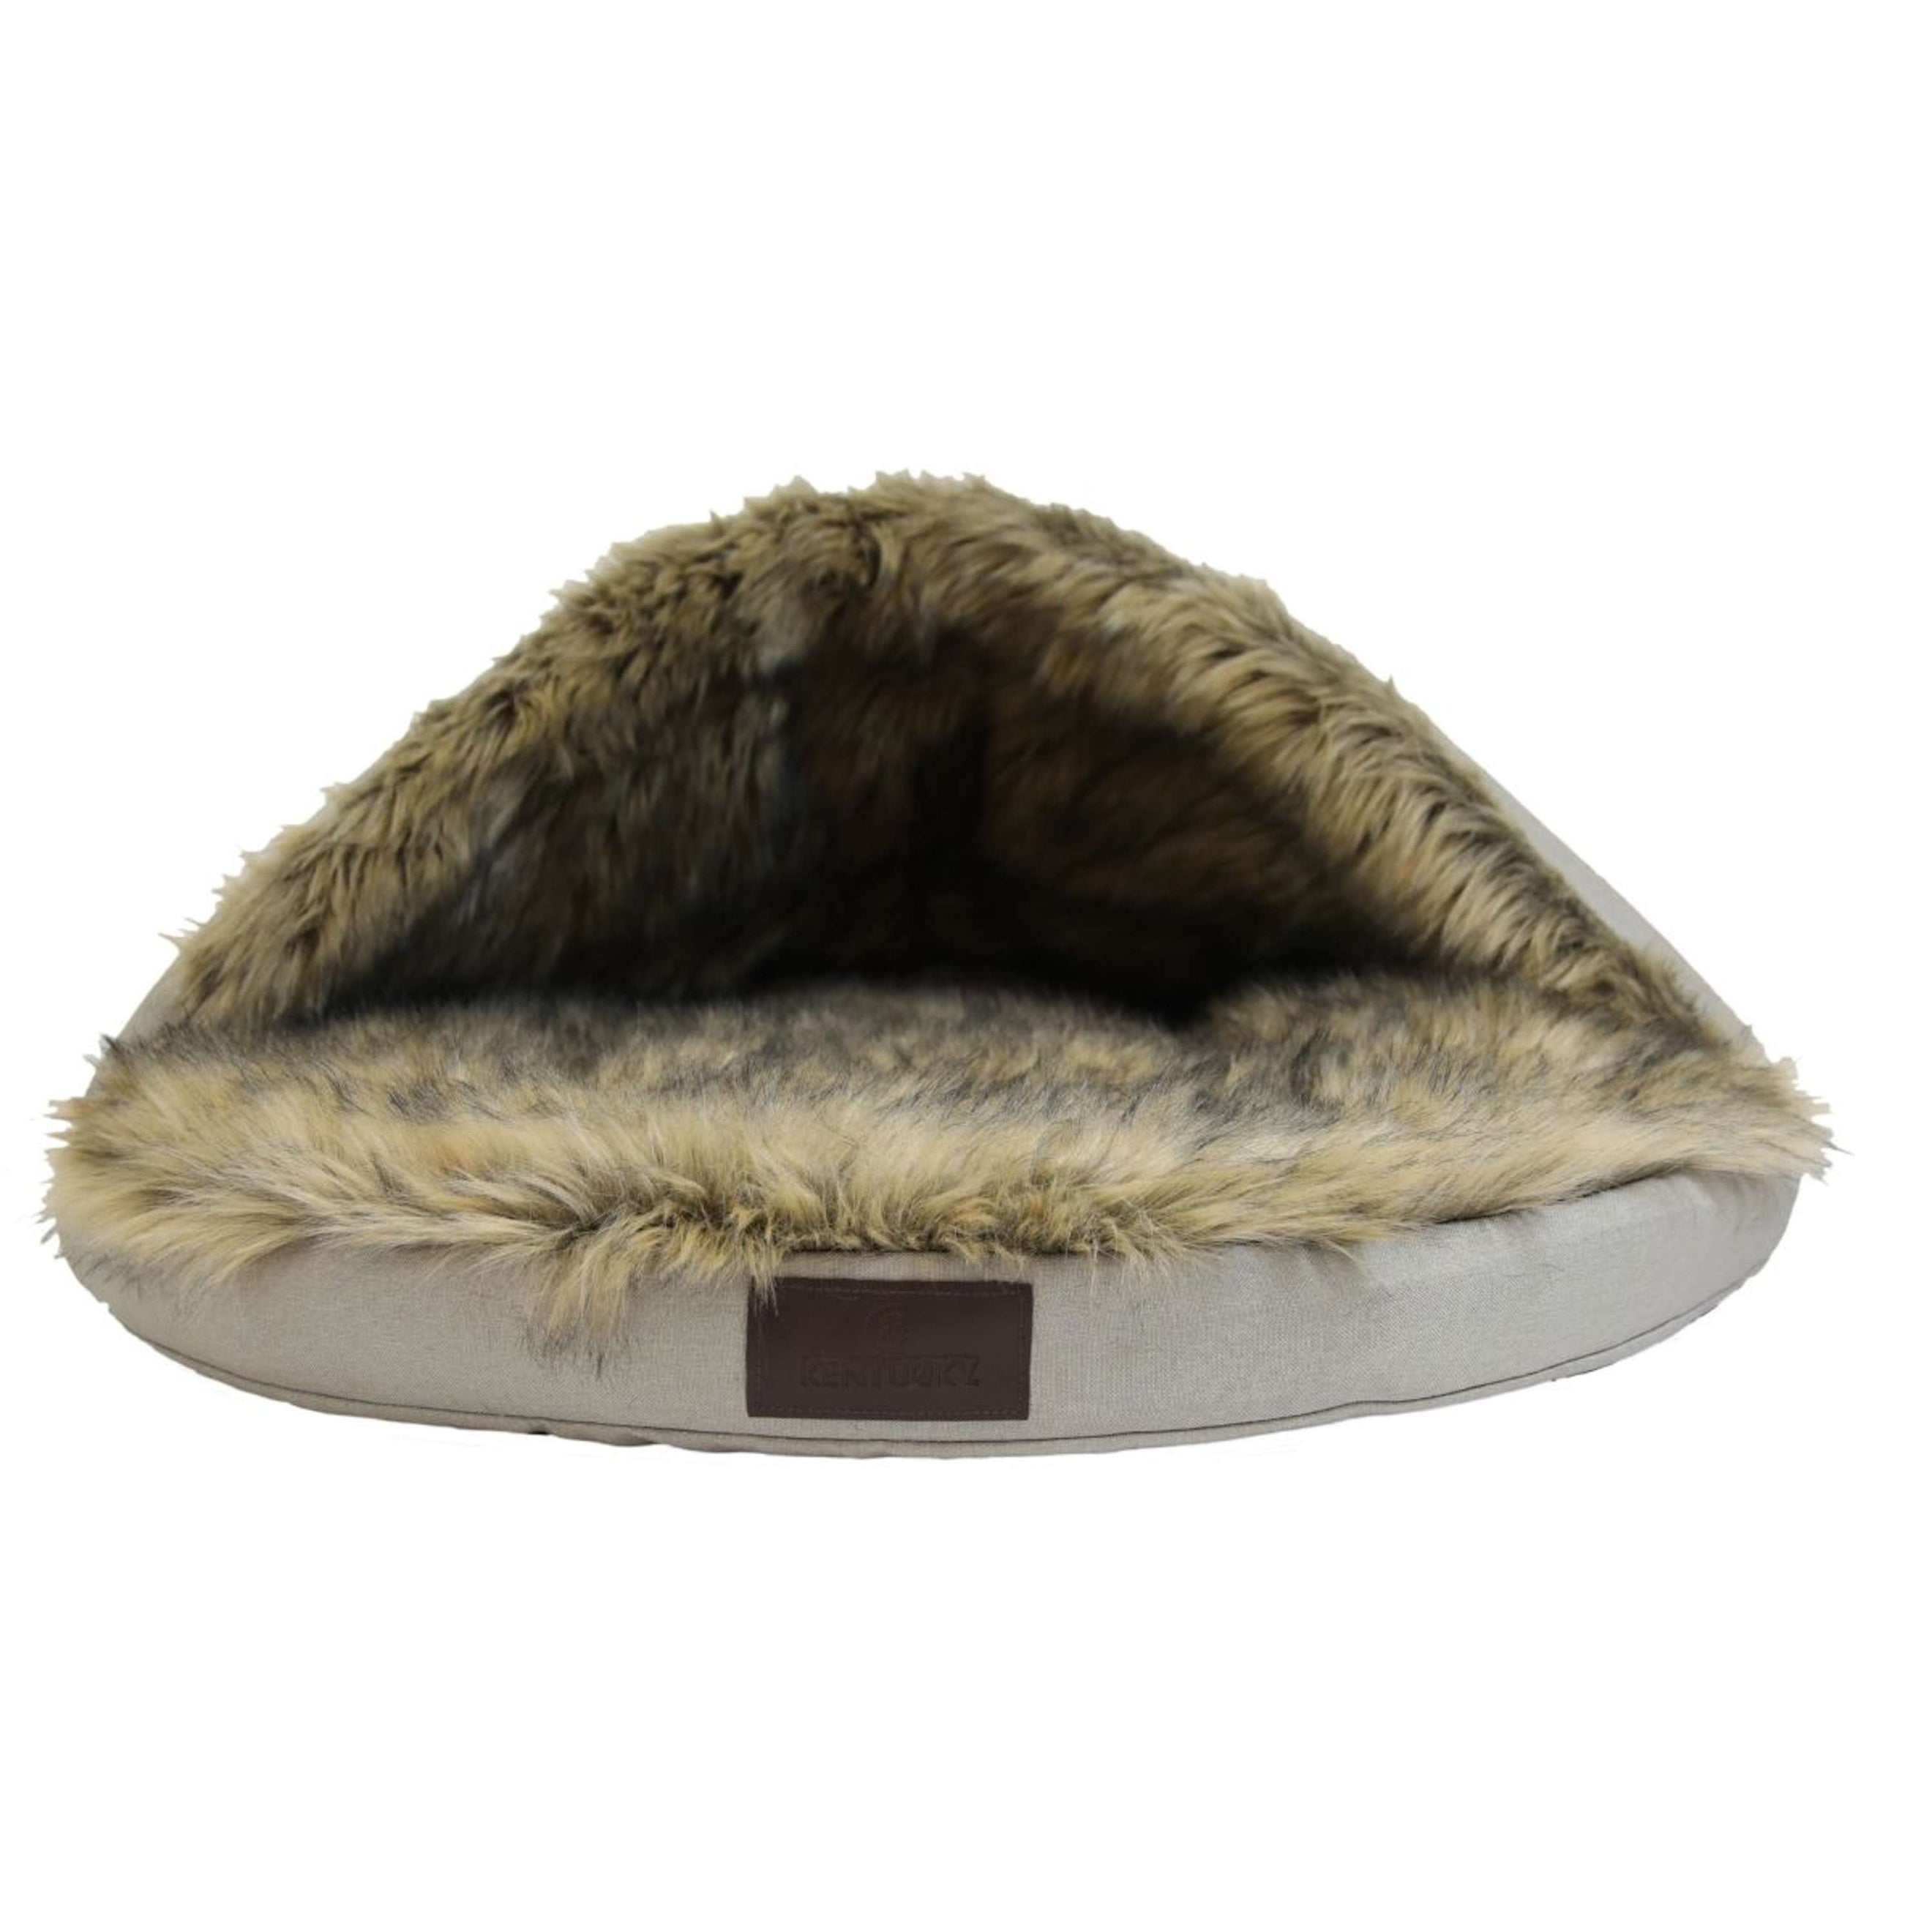 Kentucky Lit Pour Chien Igloo